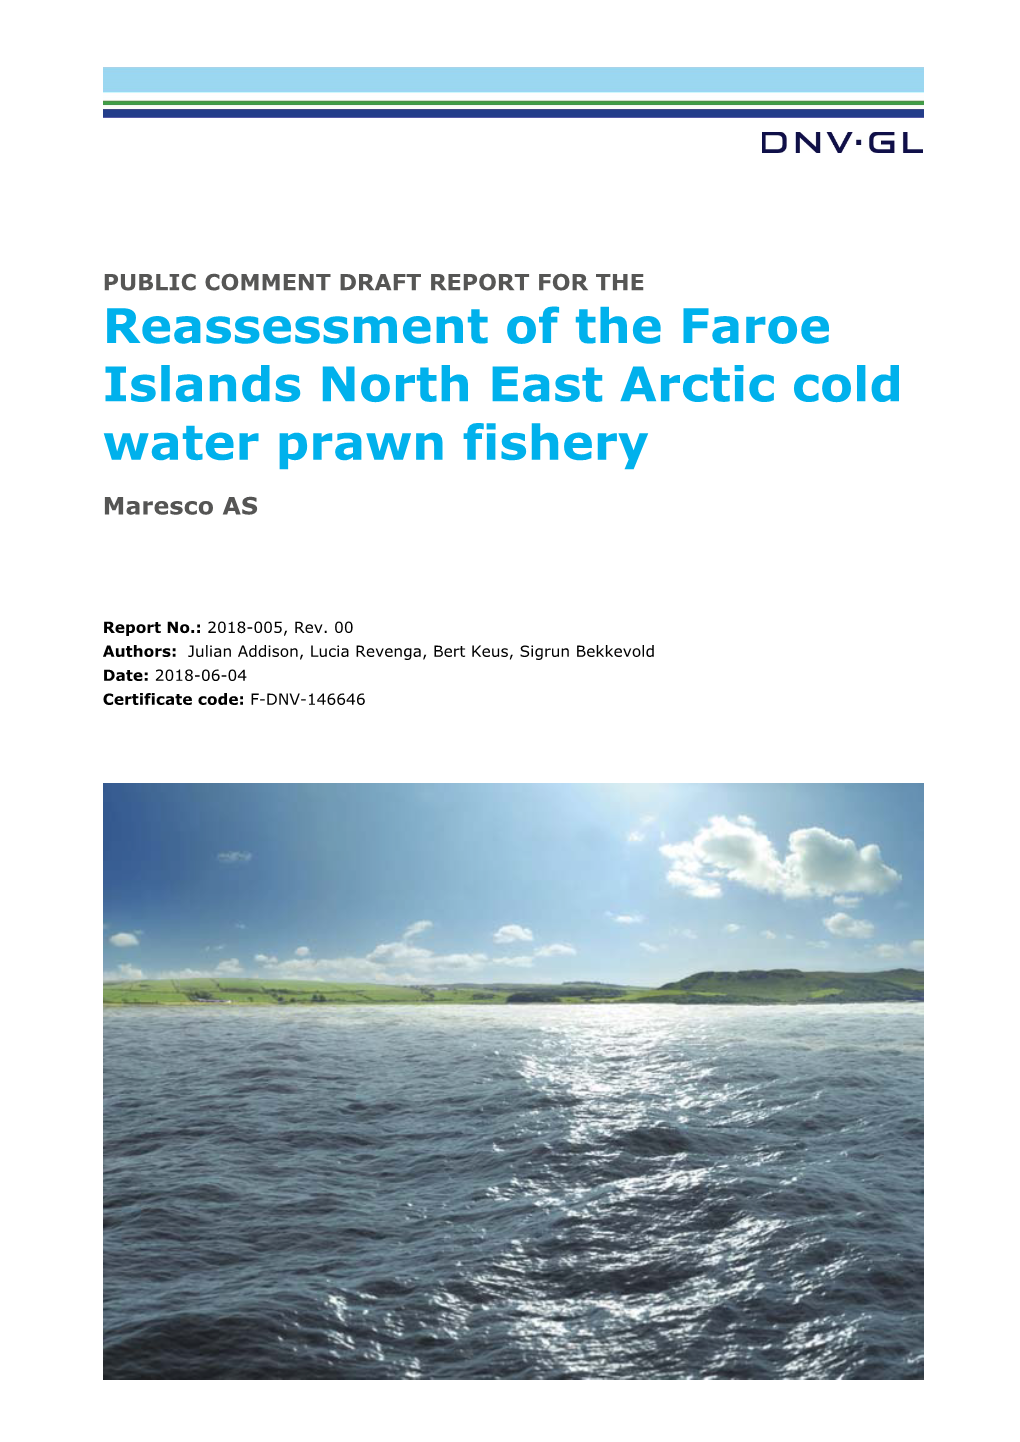 Reassessment of the Faroe Islands North East Arctic Cold Water Prawn Fishery